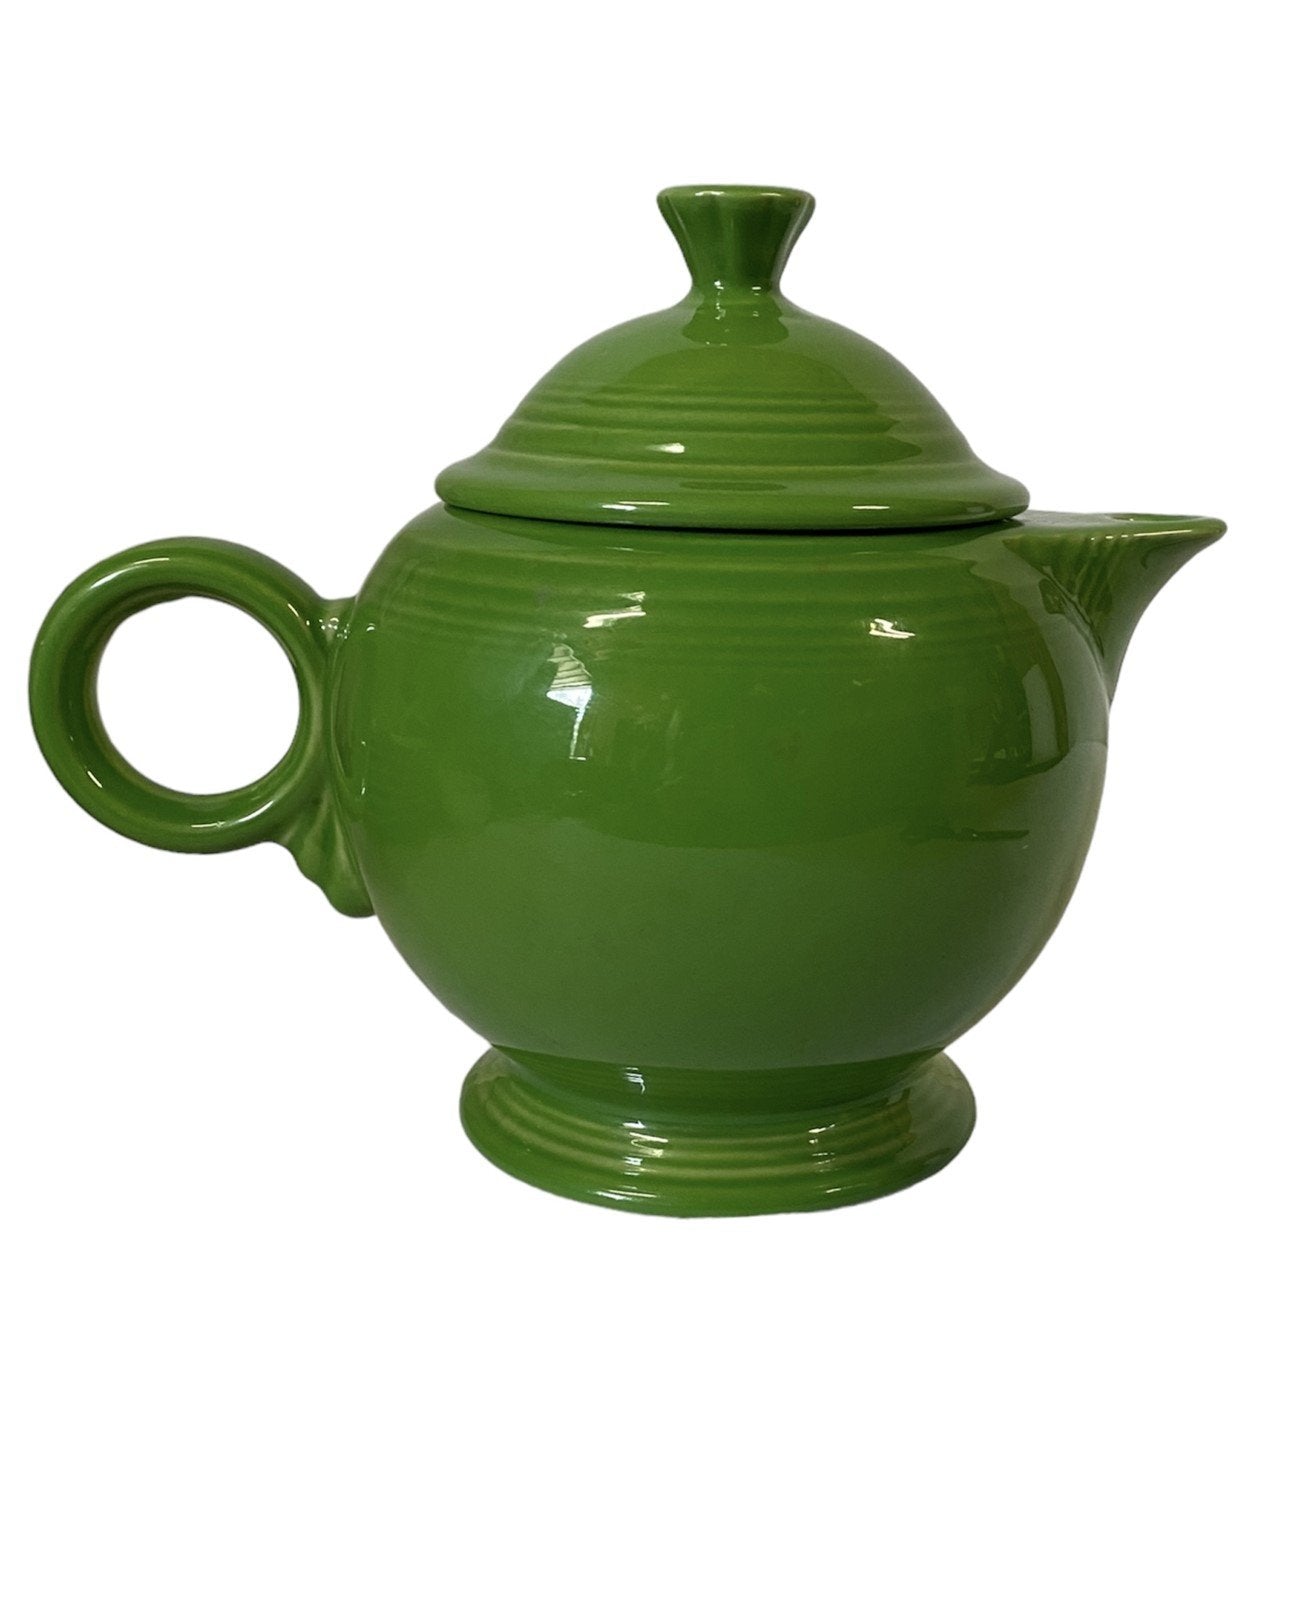 Fiesta ware, Retired Shamrock Green Teapot With Lid, Made in USA